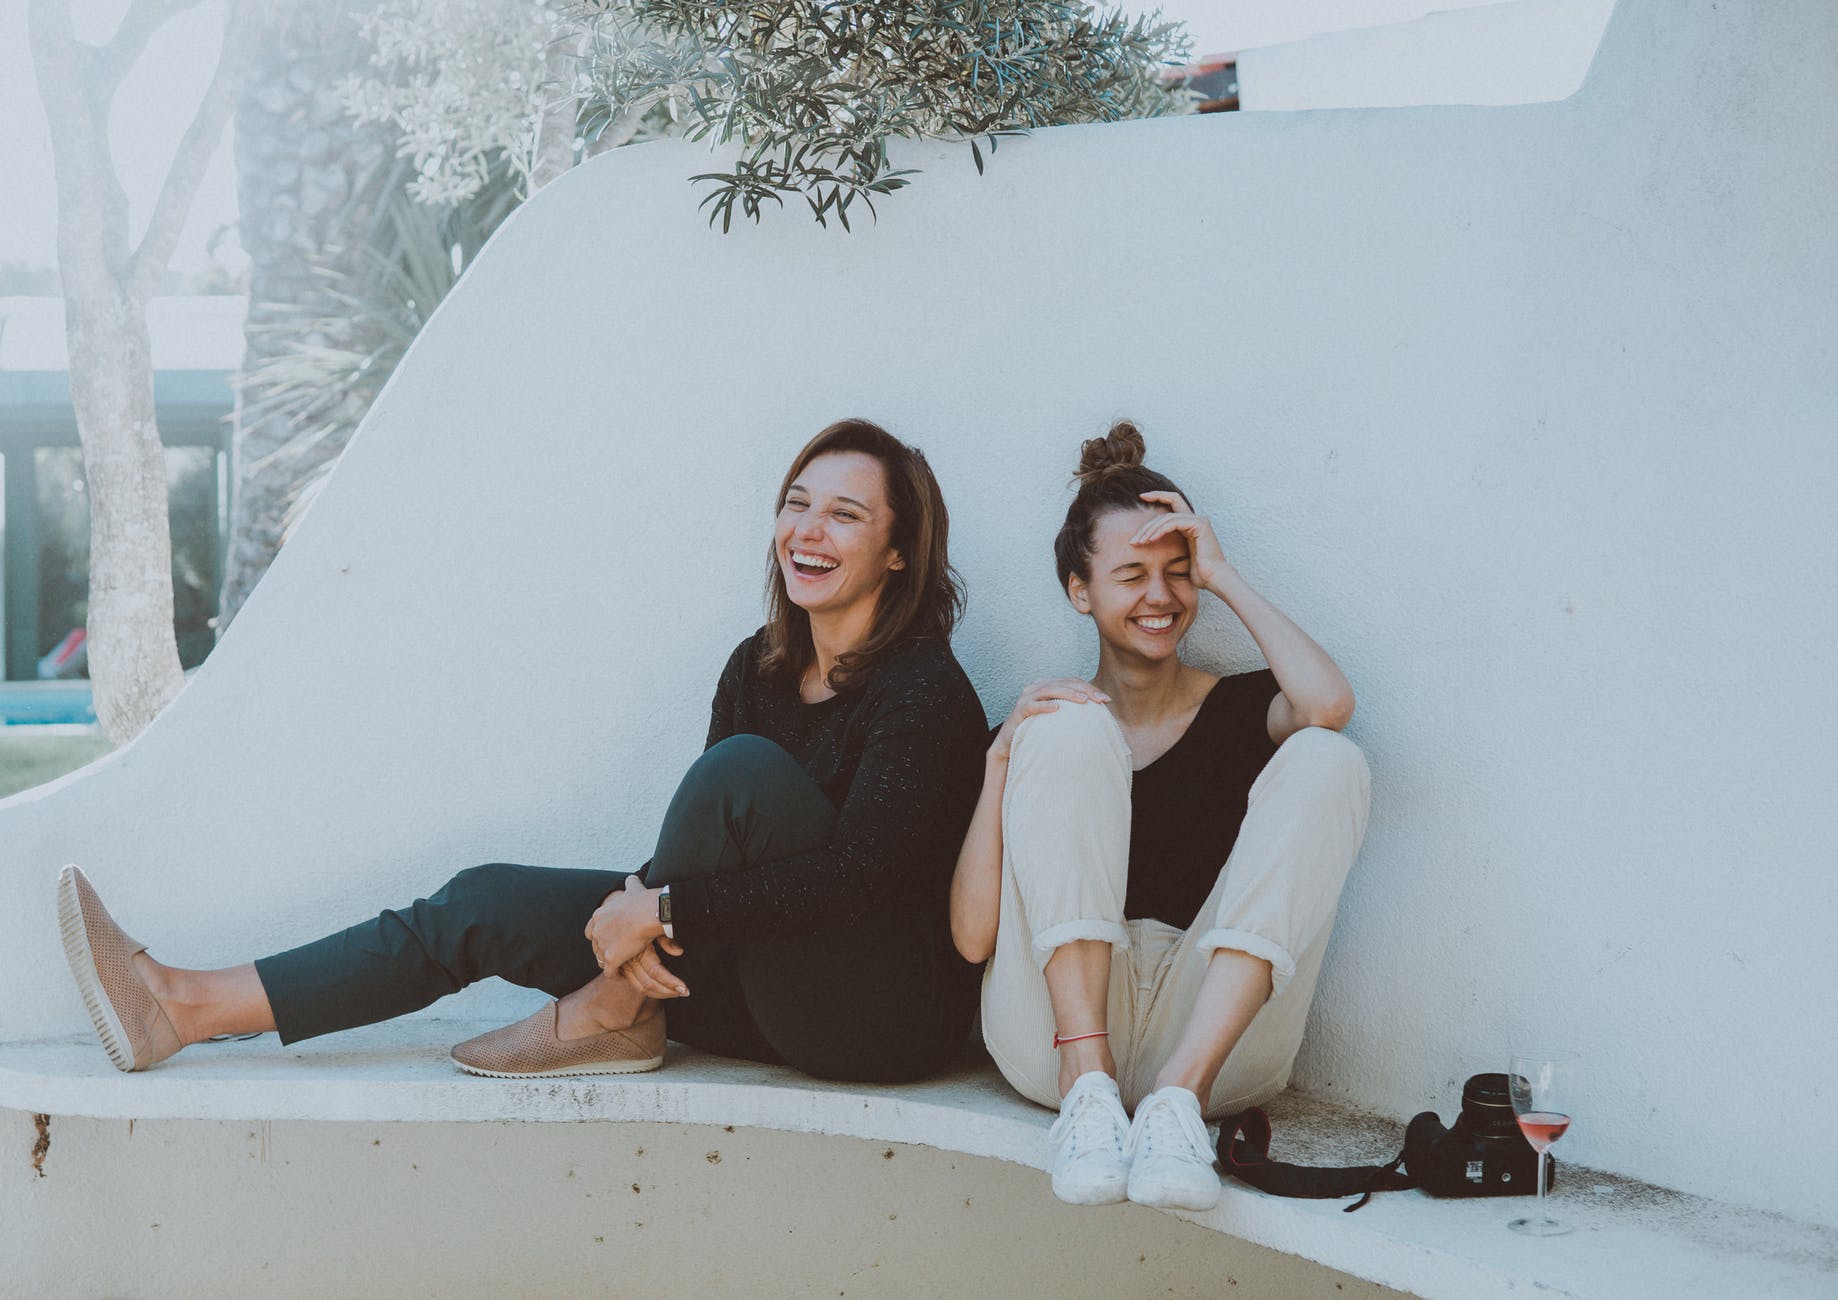 Two woman sitting on a bench laughing with wine and a camera